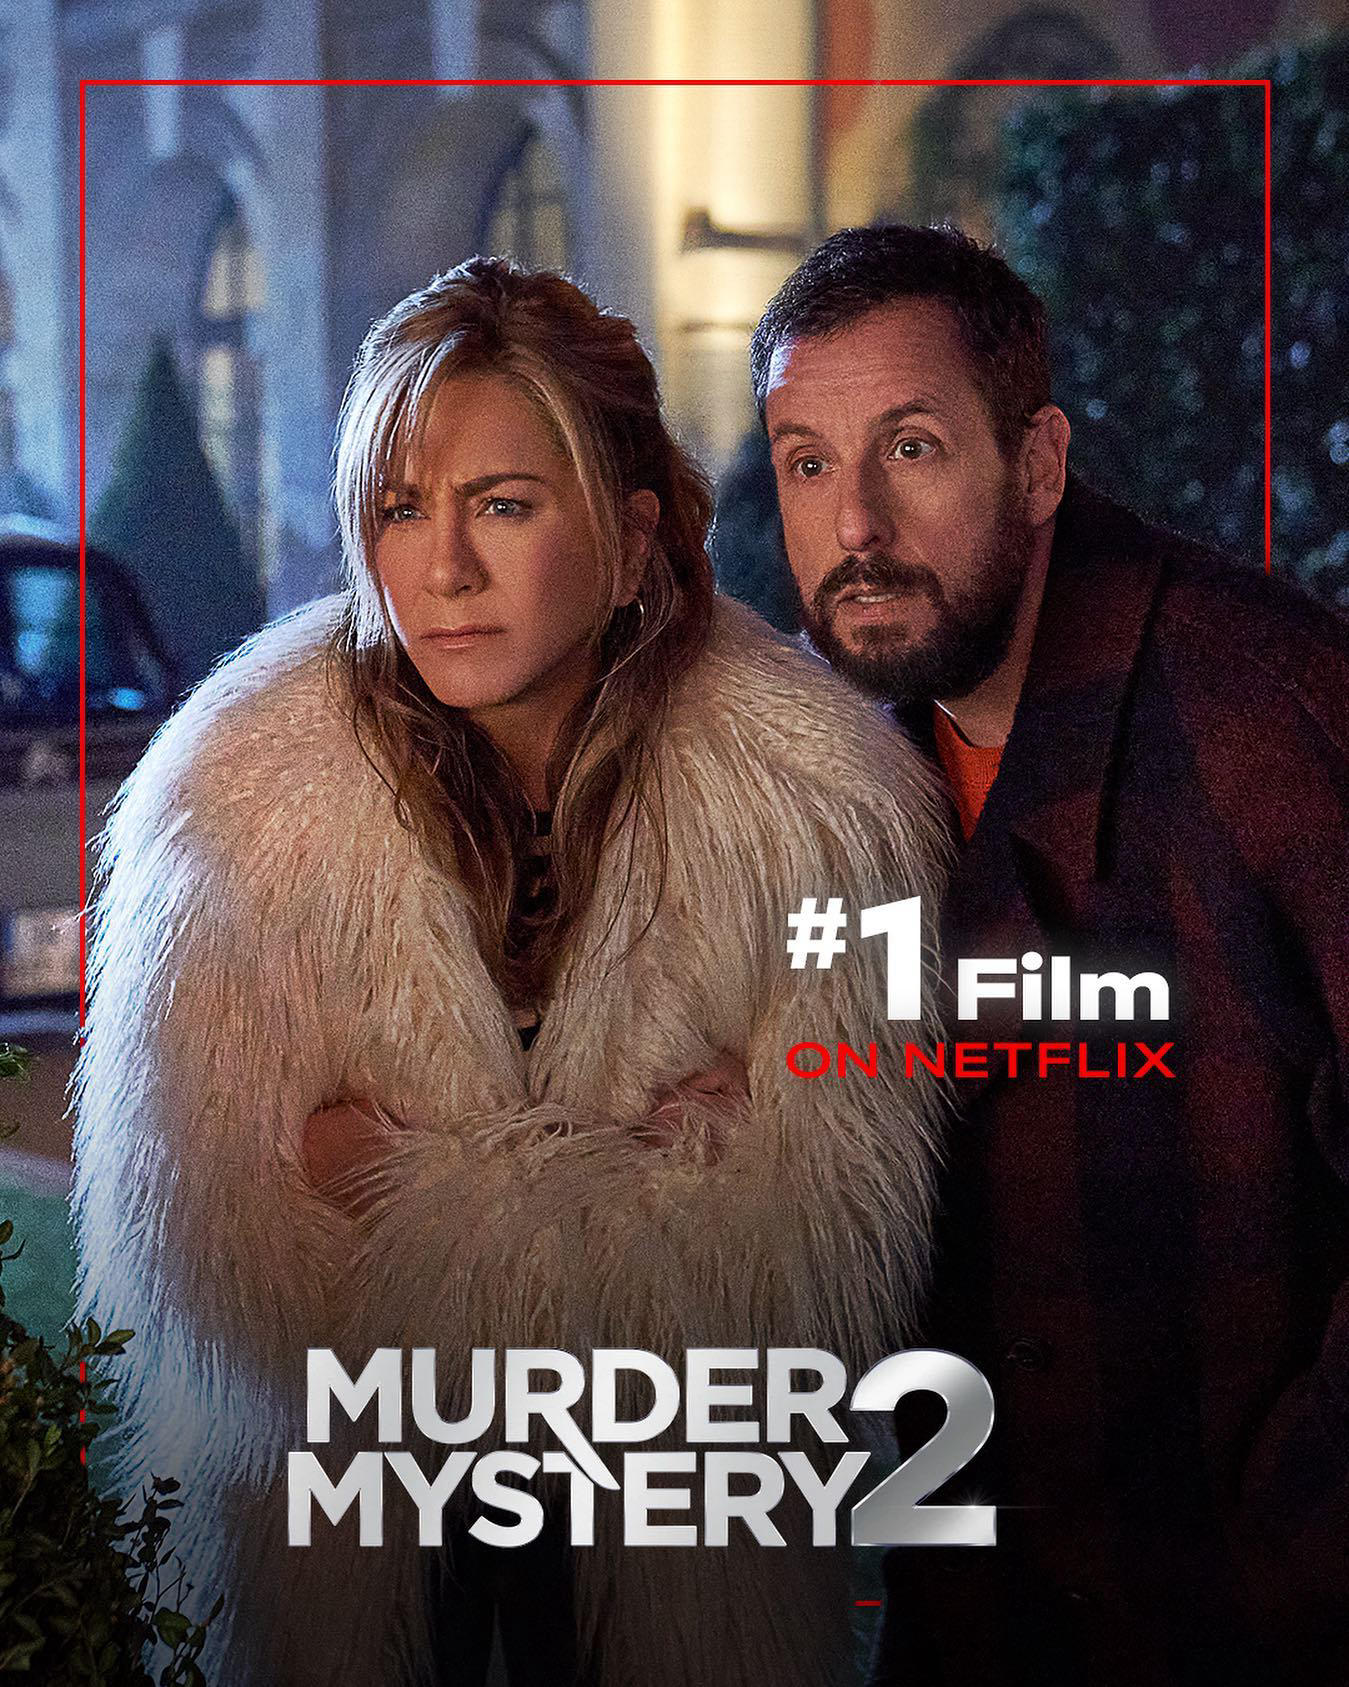 Murder Mystery 2 debuted in the #1 spot on the English Films List